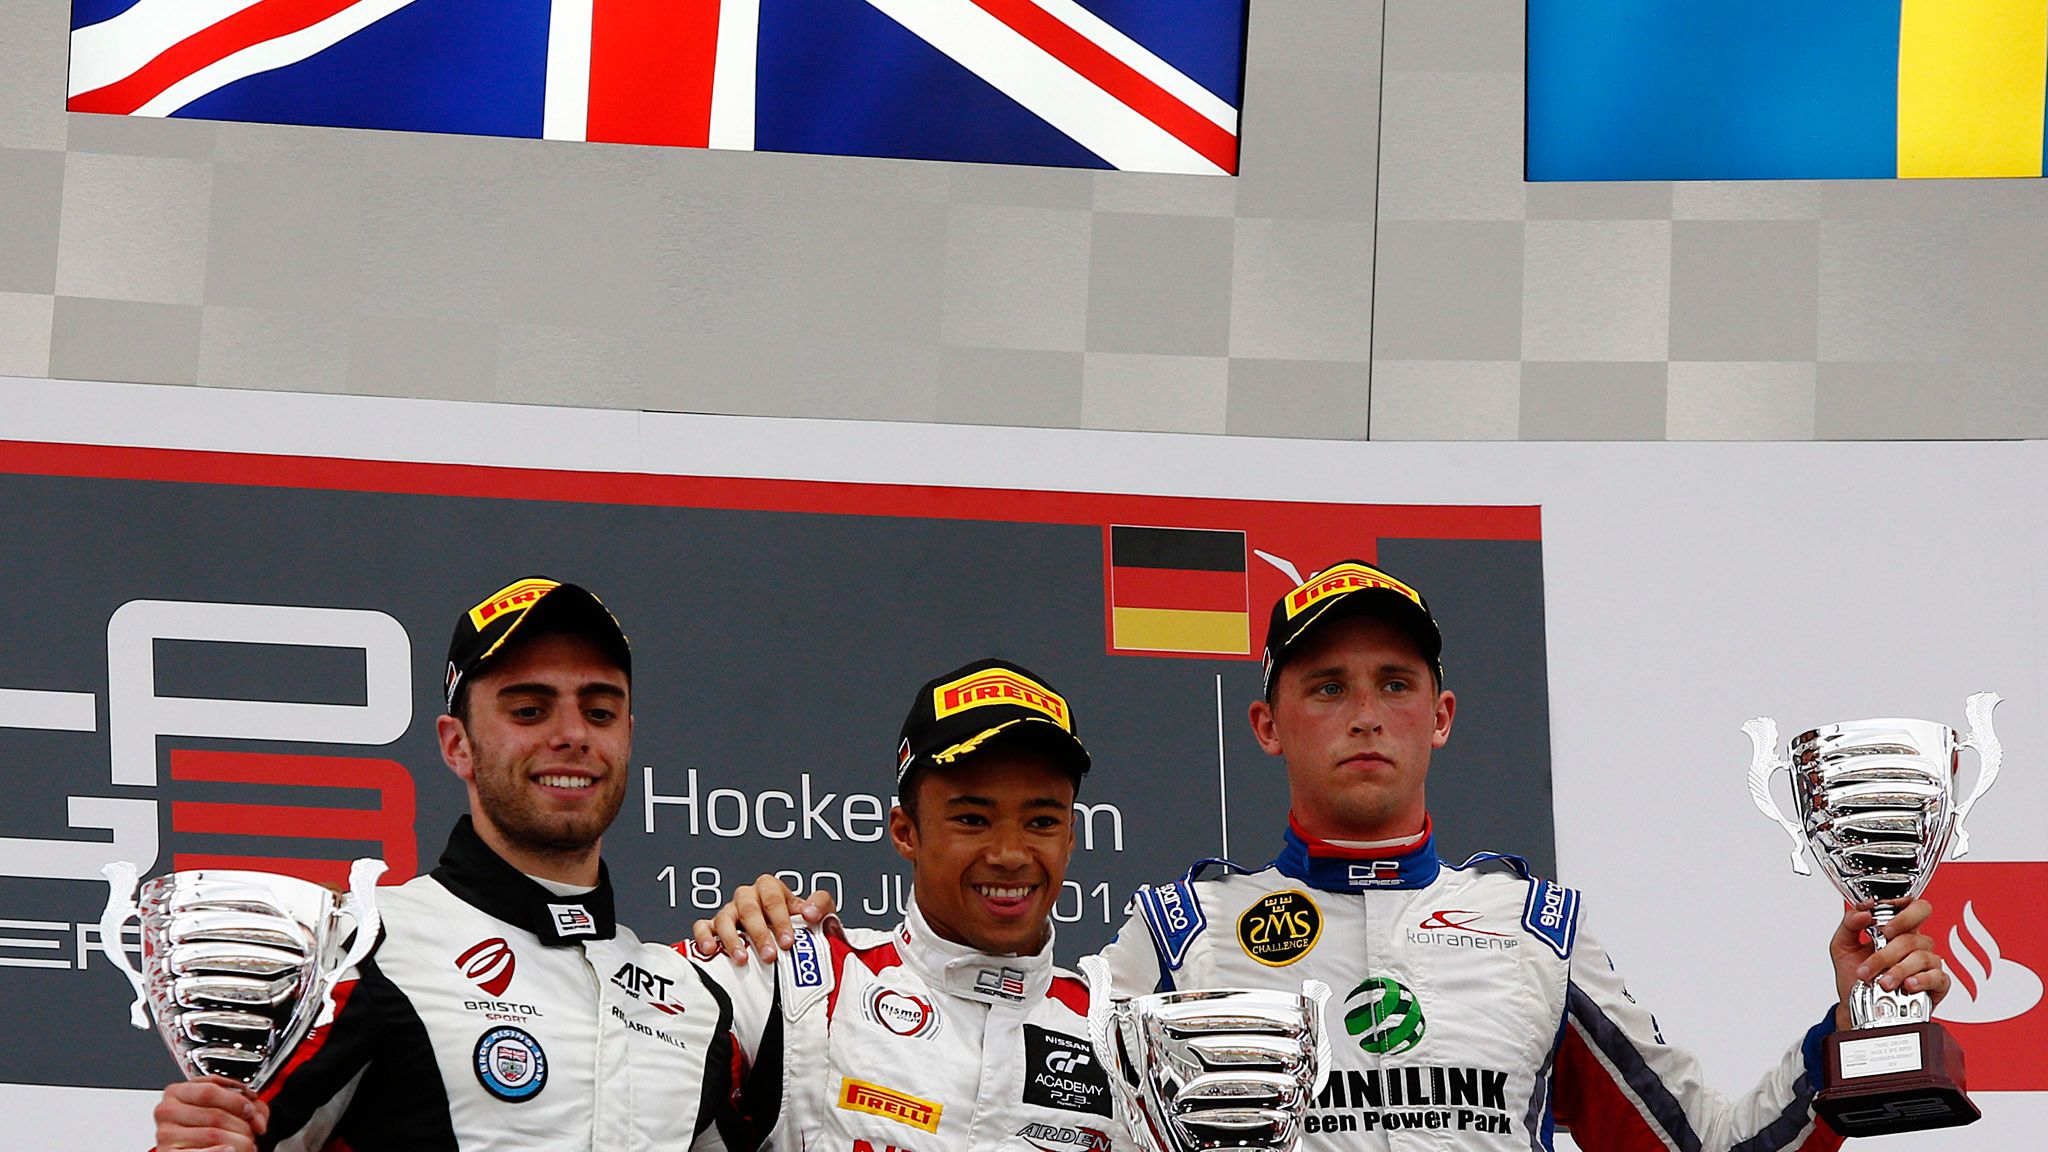 Jann Mardenborough clinched his maiden GP3 victory in Race Two at